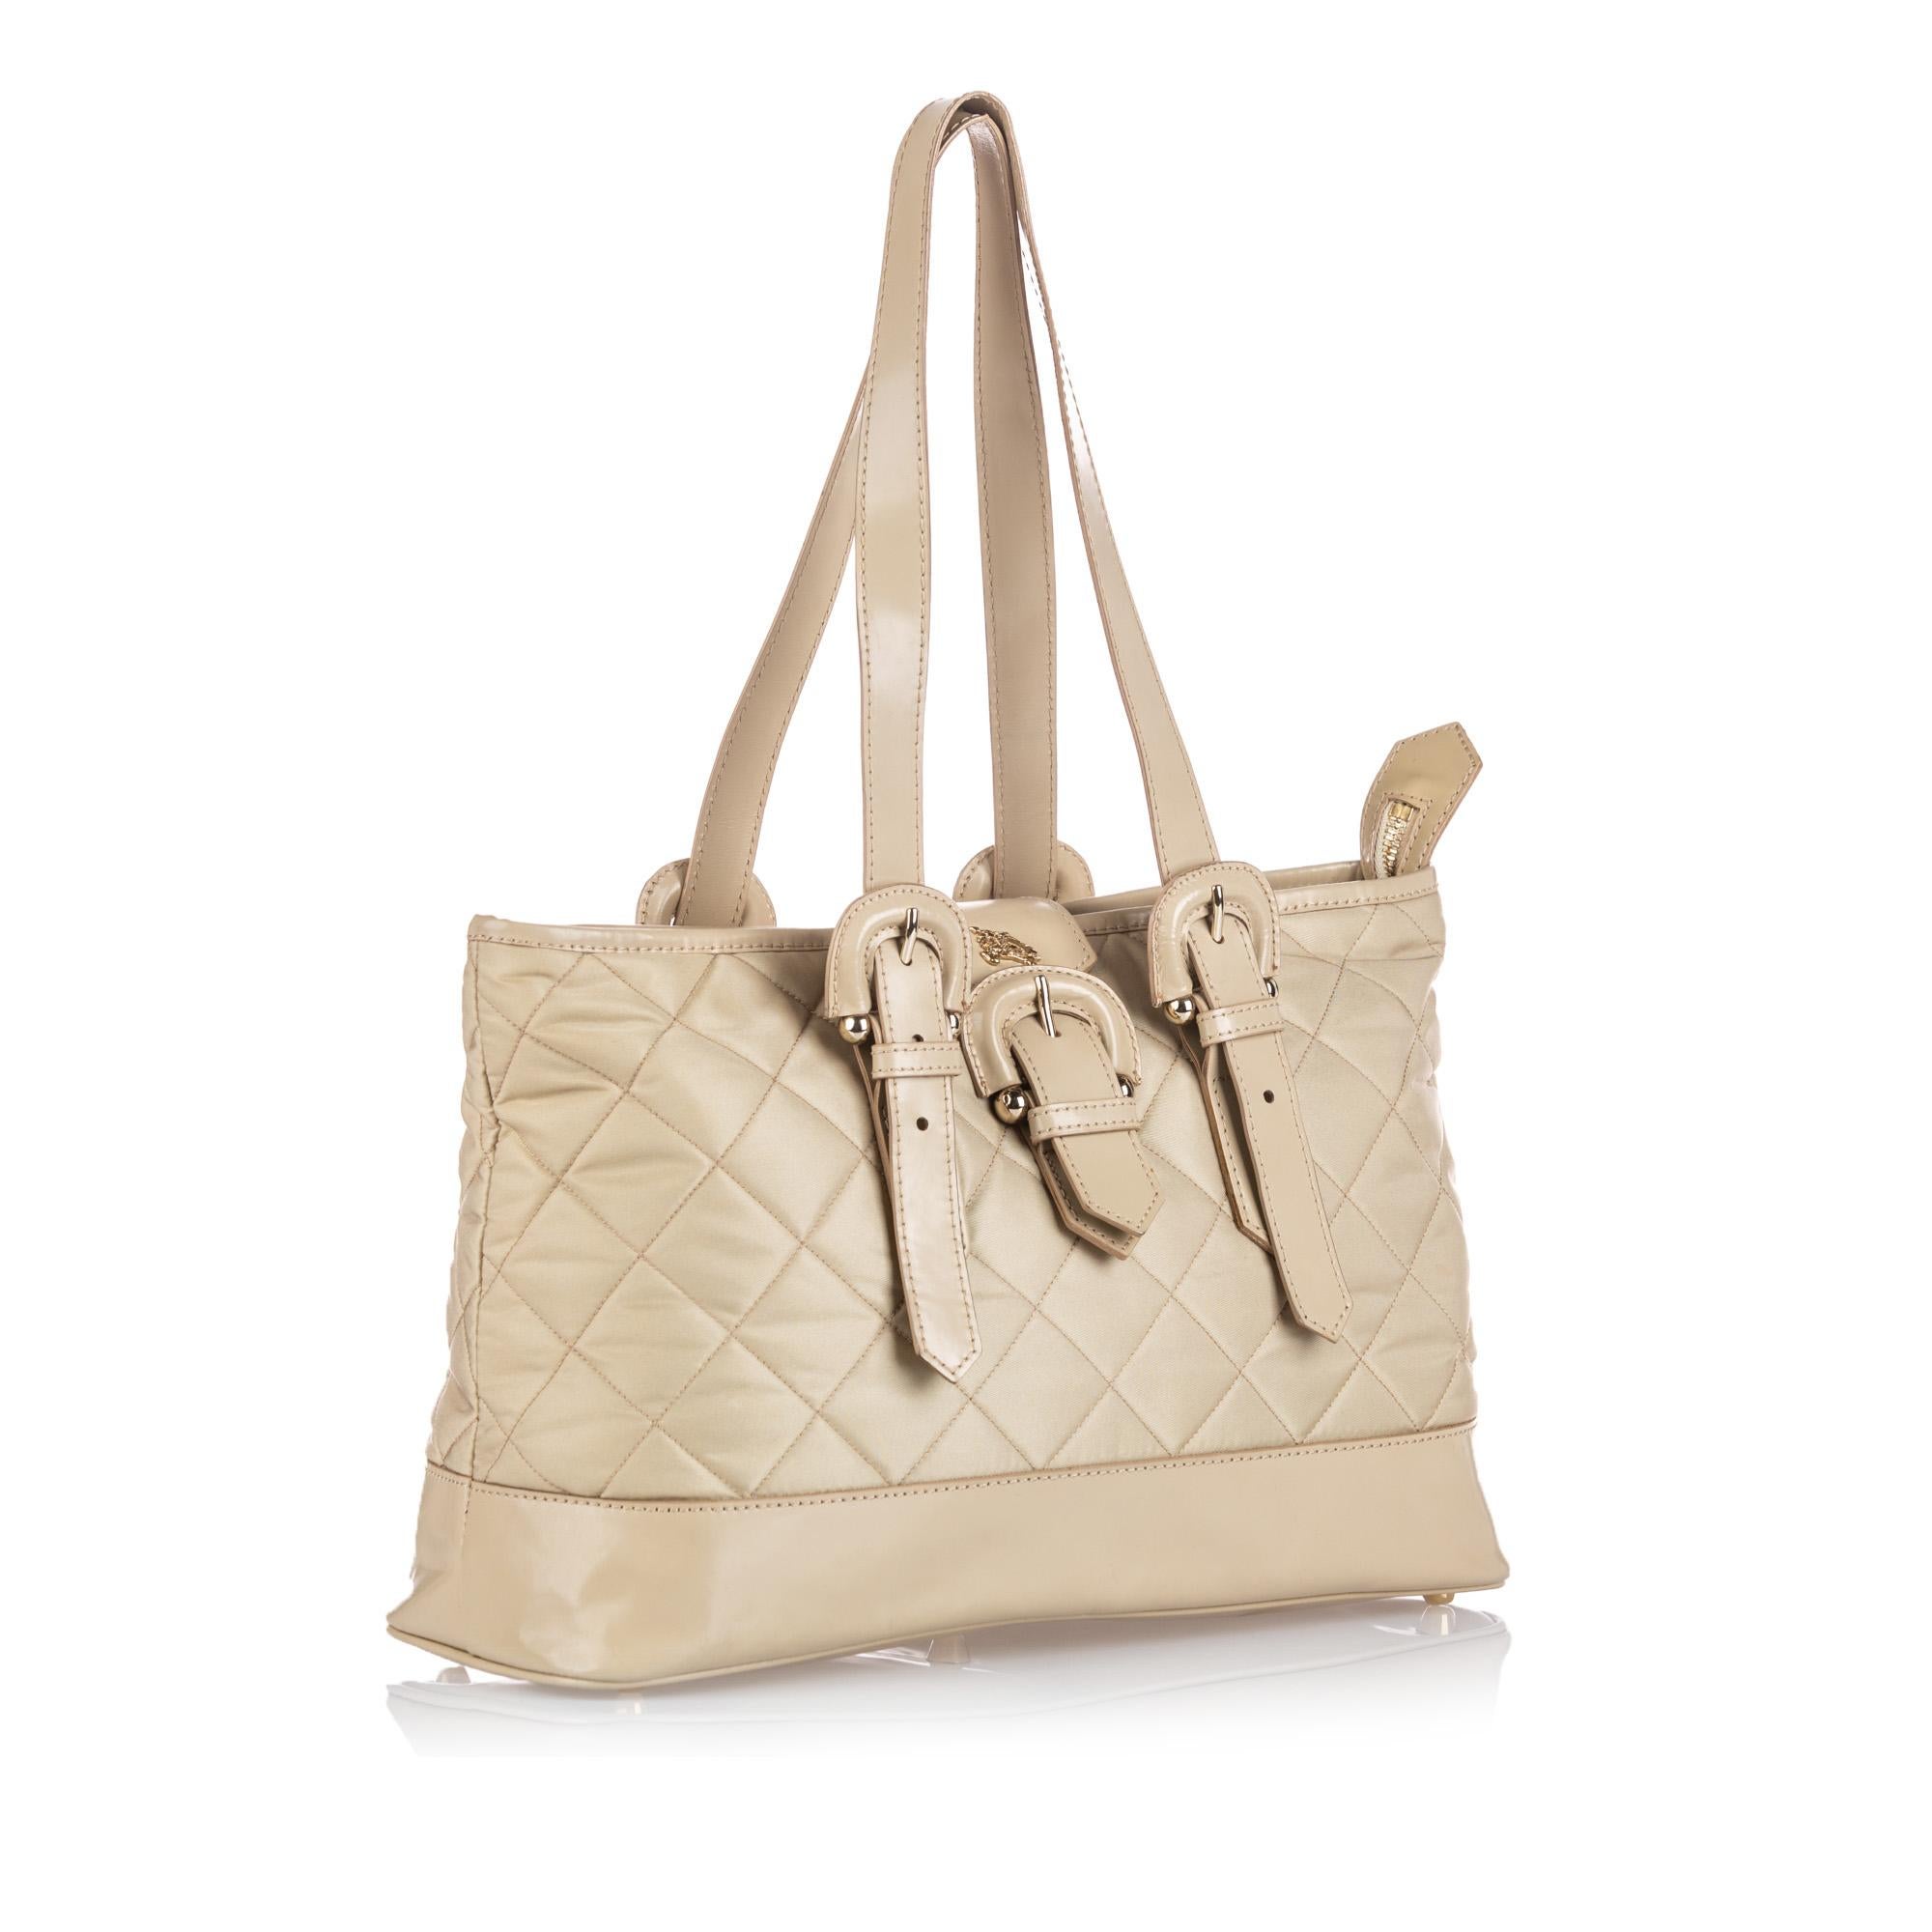 This tote features a quilted nylon body with leather trim, flat leather handles, a top strap with a buckle closure, a top zip closure, an interior zip and slip pockets. It carries as B+ condition rating.

Inclusions: 
This item does not come with